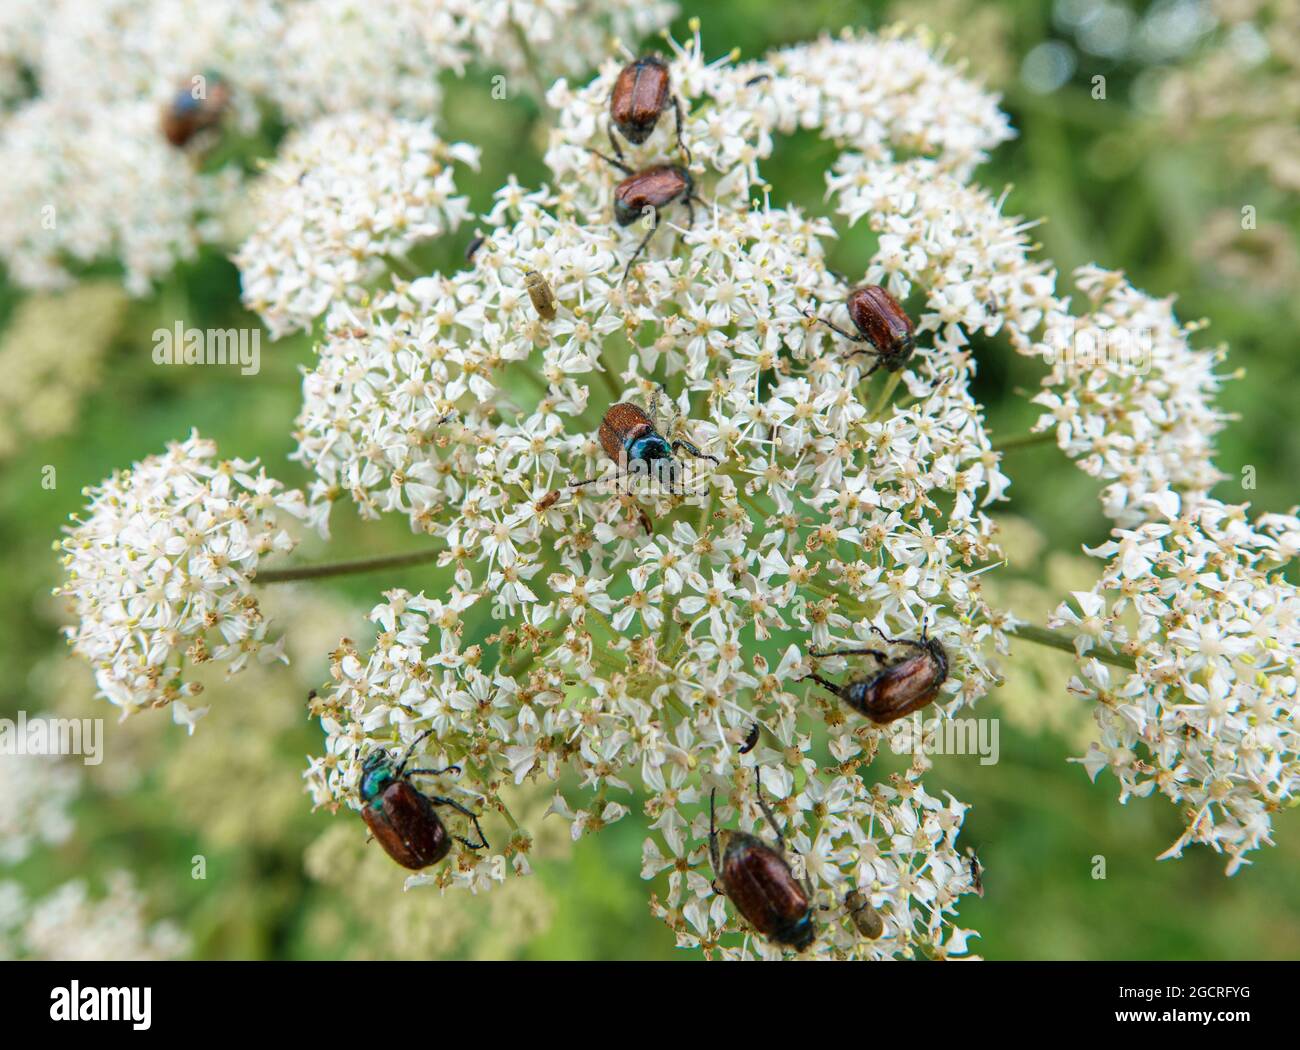 a collection of Garden Chafer beetles (Phyllopertha horticola) gather on Cow Parlsey (Anthriscus sylvestris) for procreation Stock Photo